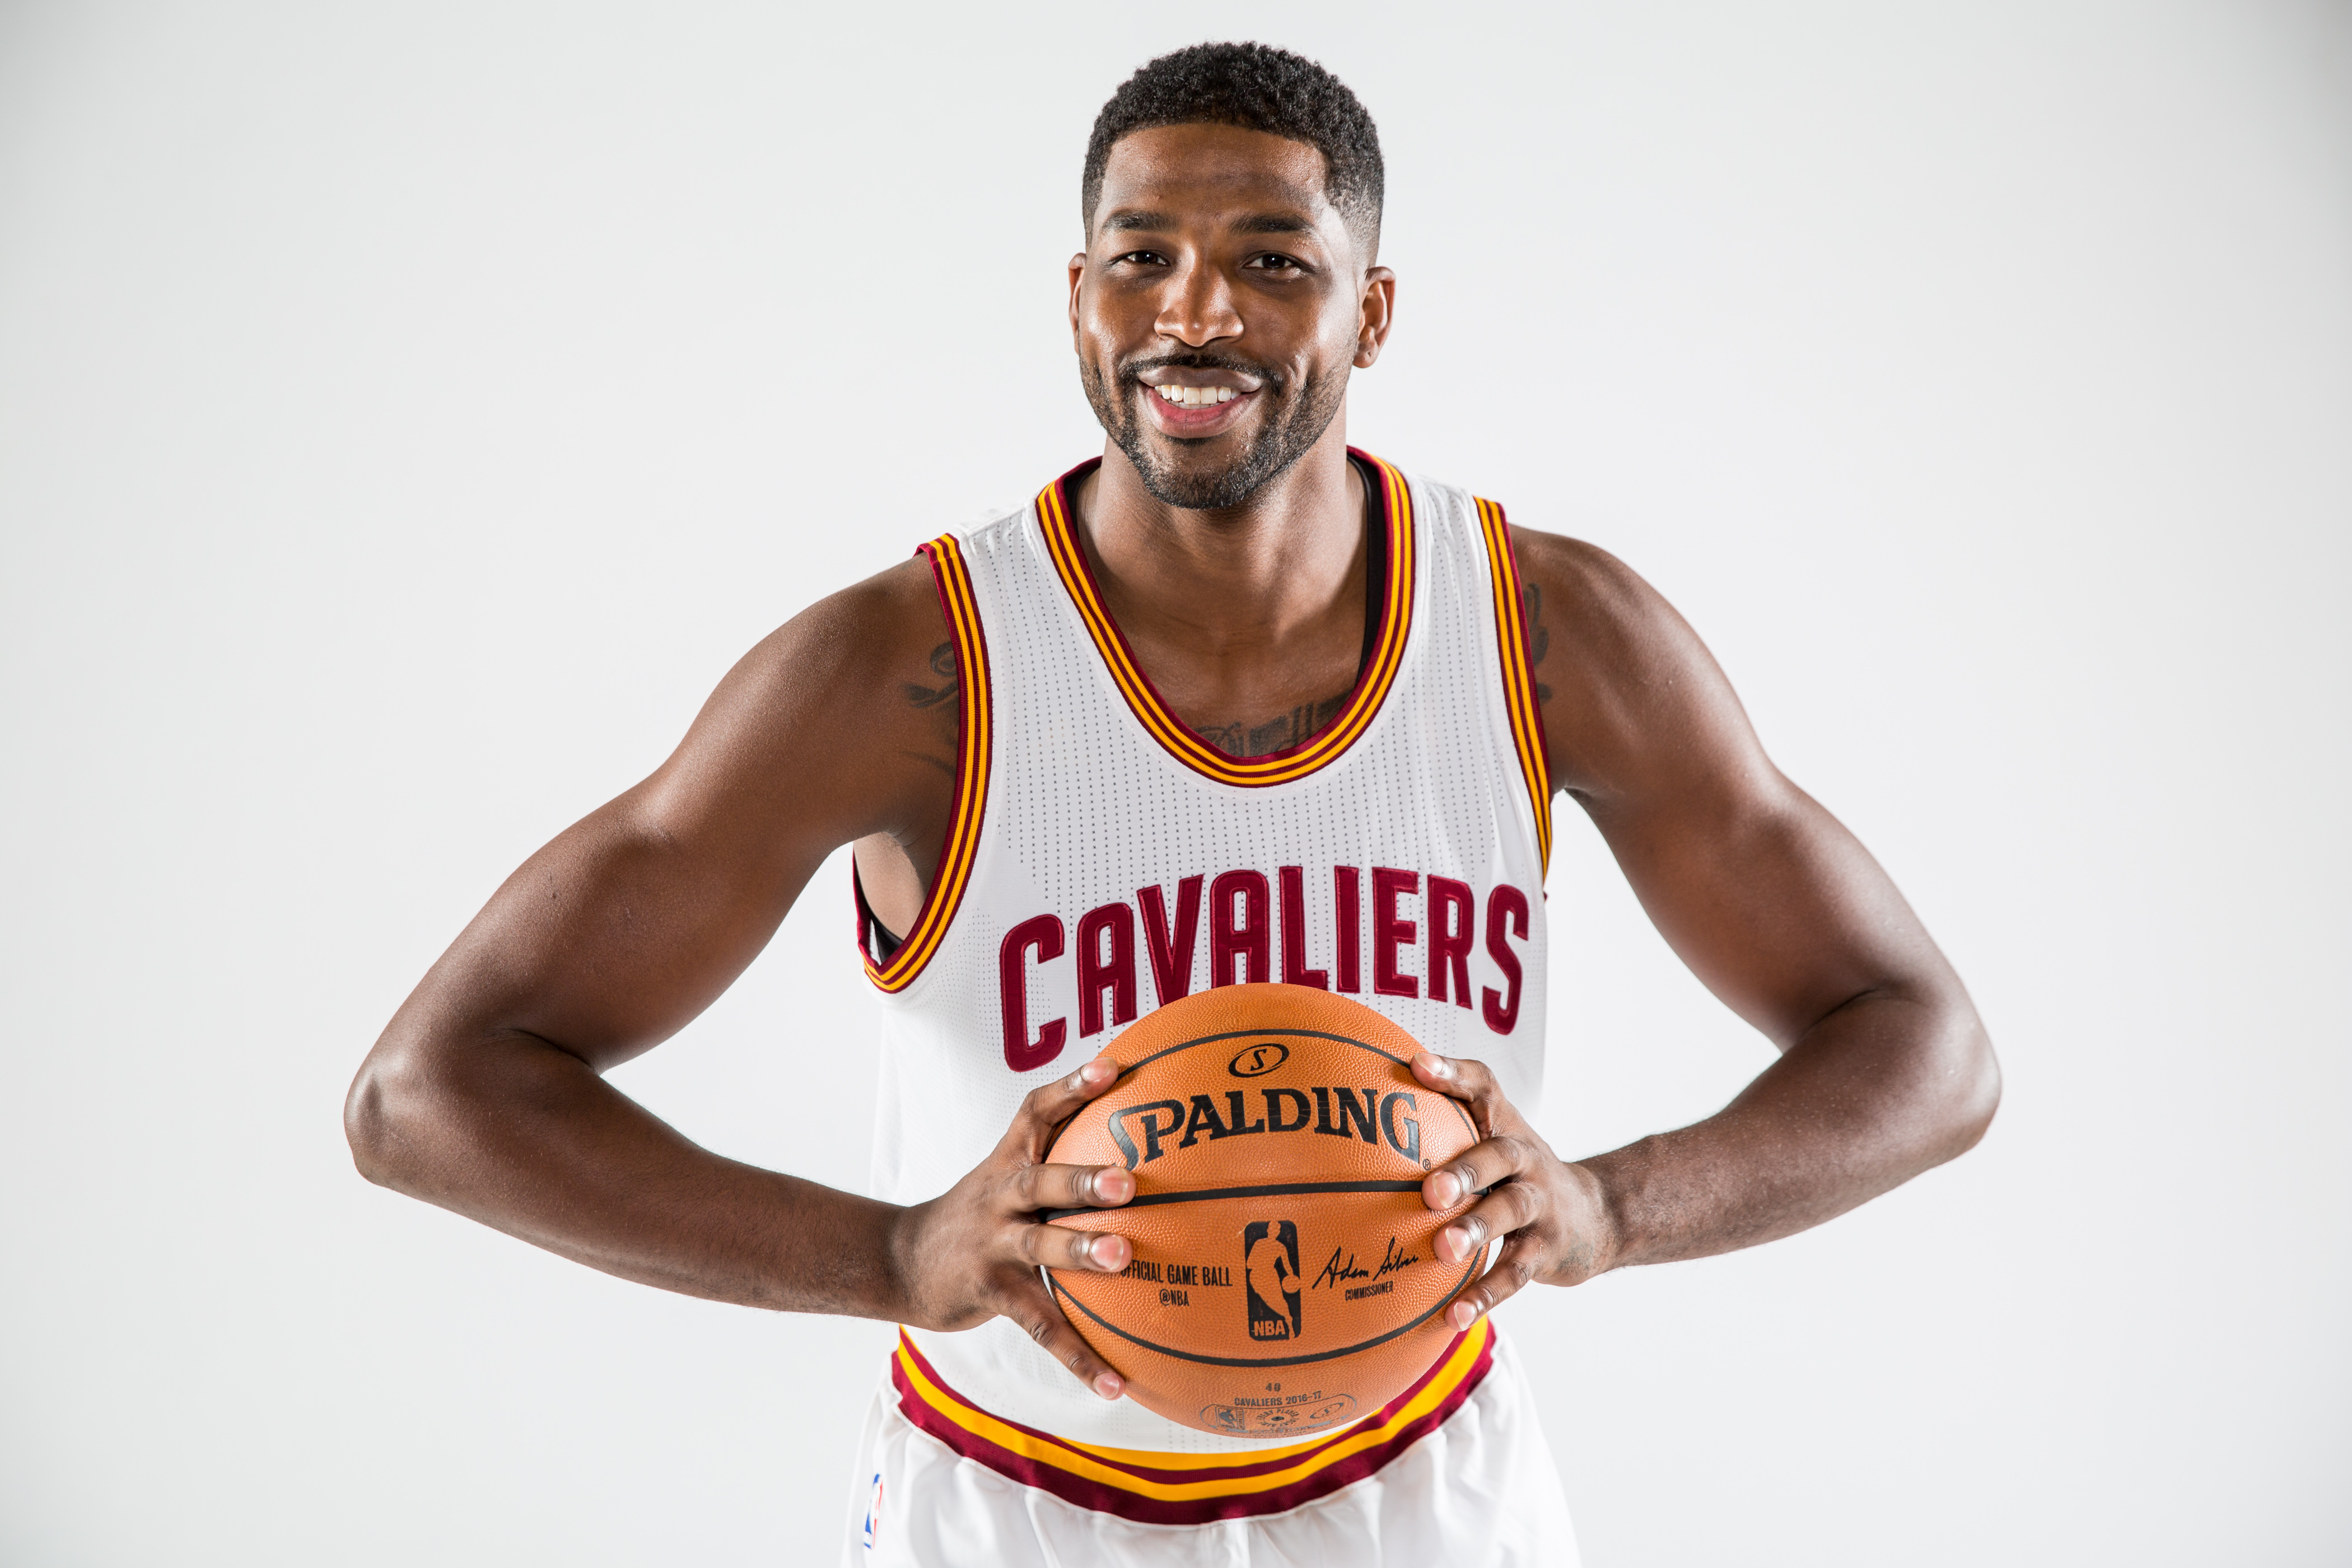 2016-2016 Cleveland Cavaliers Media Day